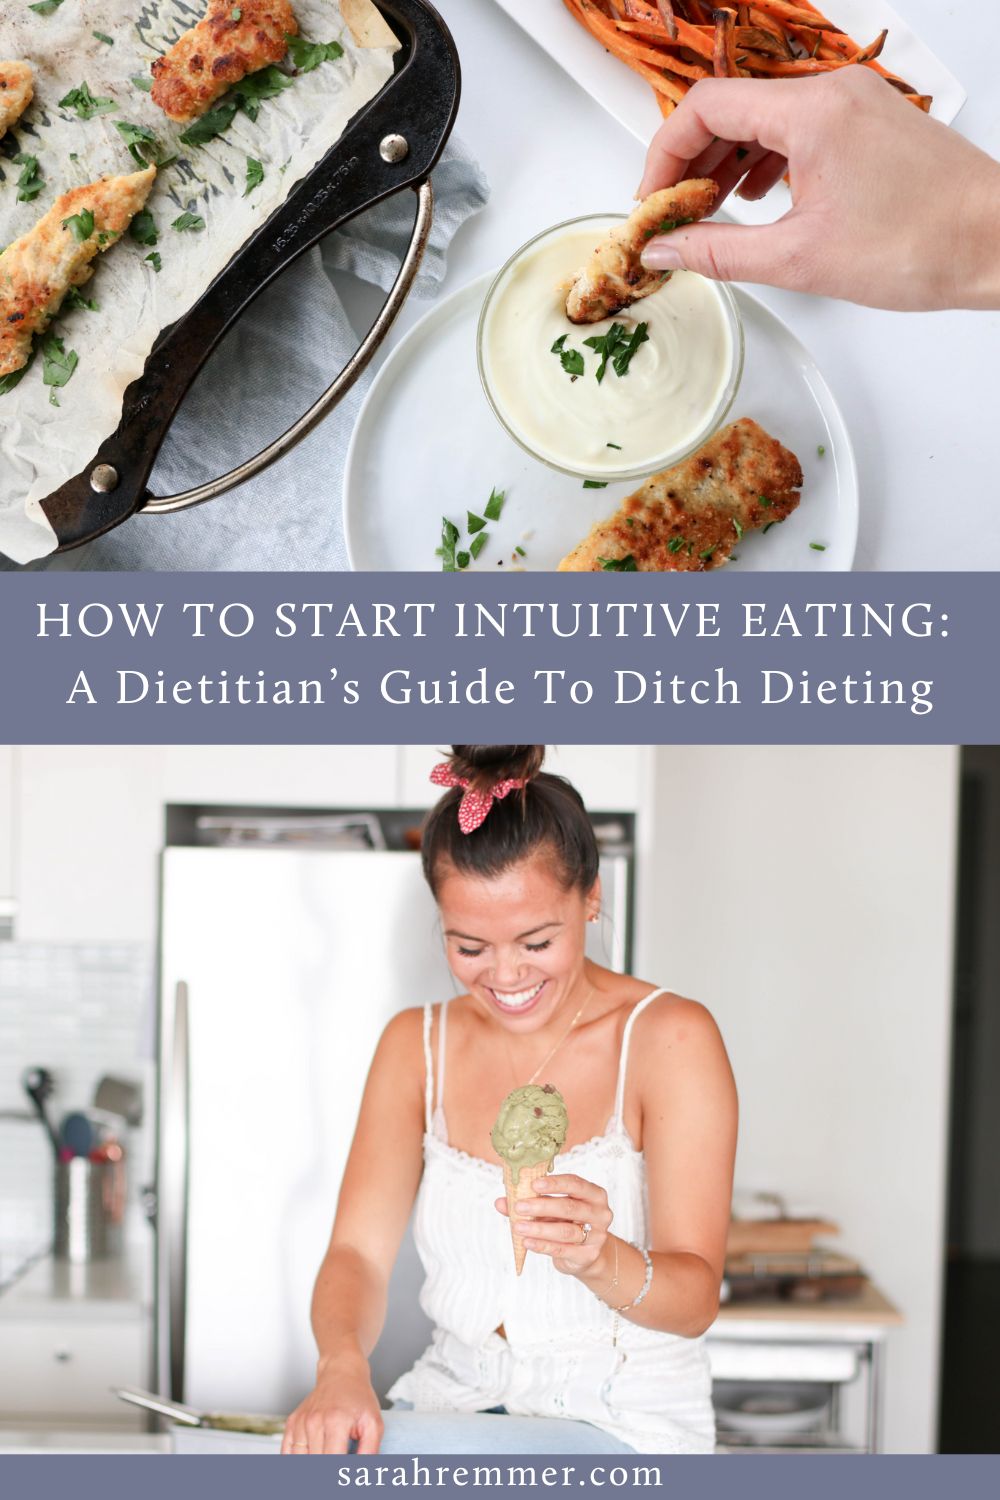 How to start intuitive eating? Learn to listen to your body's cues, break free from diets, and cultivate a healthy relationship with food.